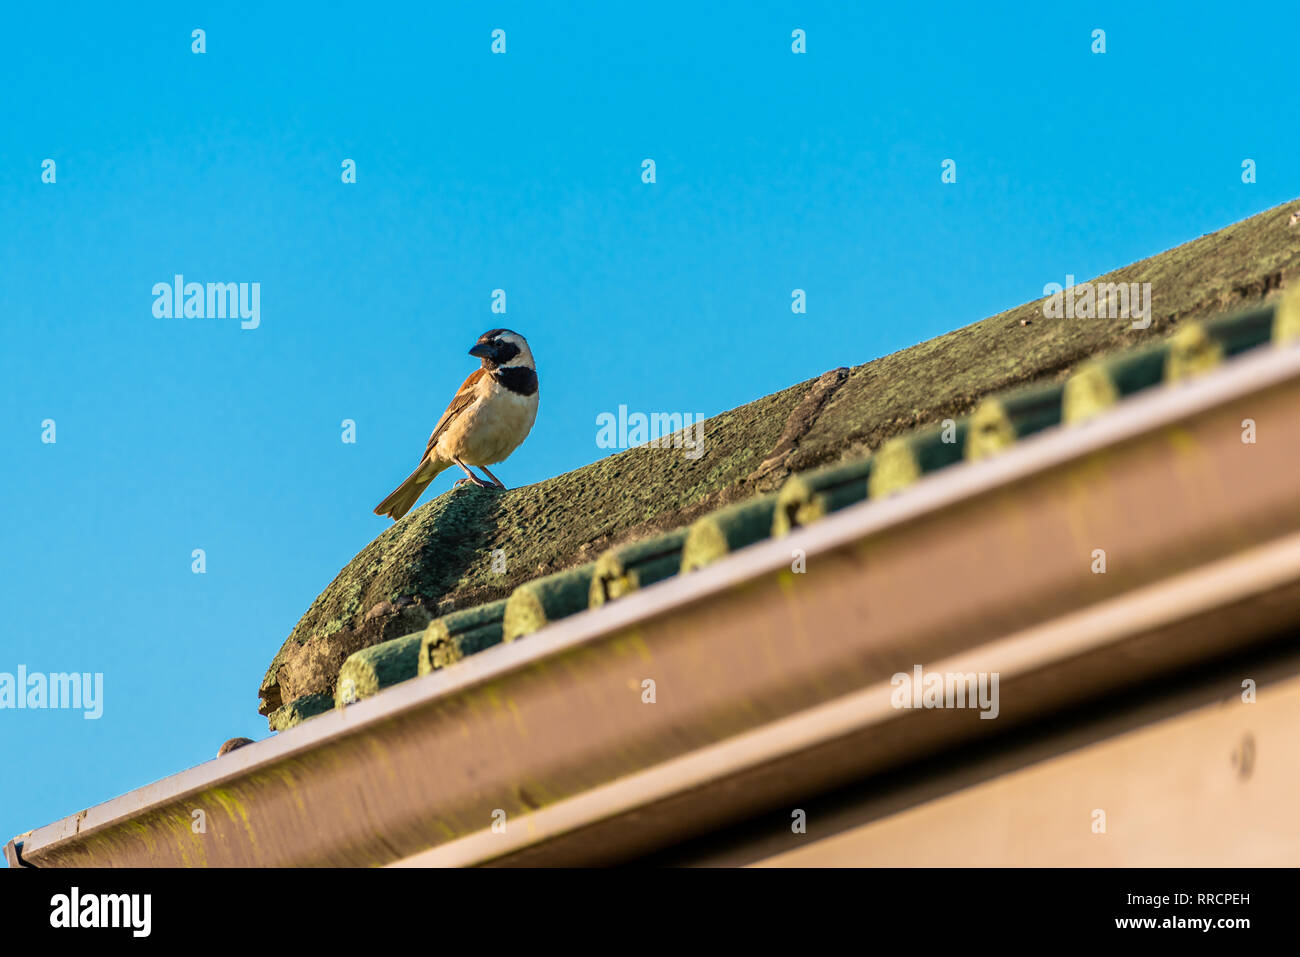 A Cape Sparrow in an urban environment, sitting on a roof. Passer melanurus. Stock Photo